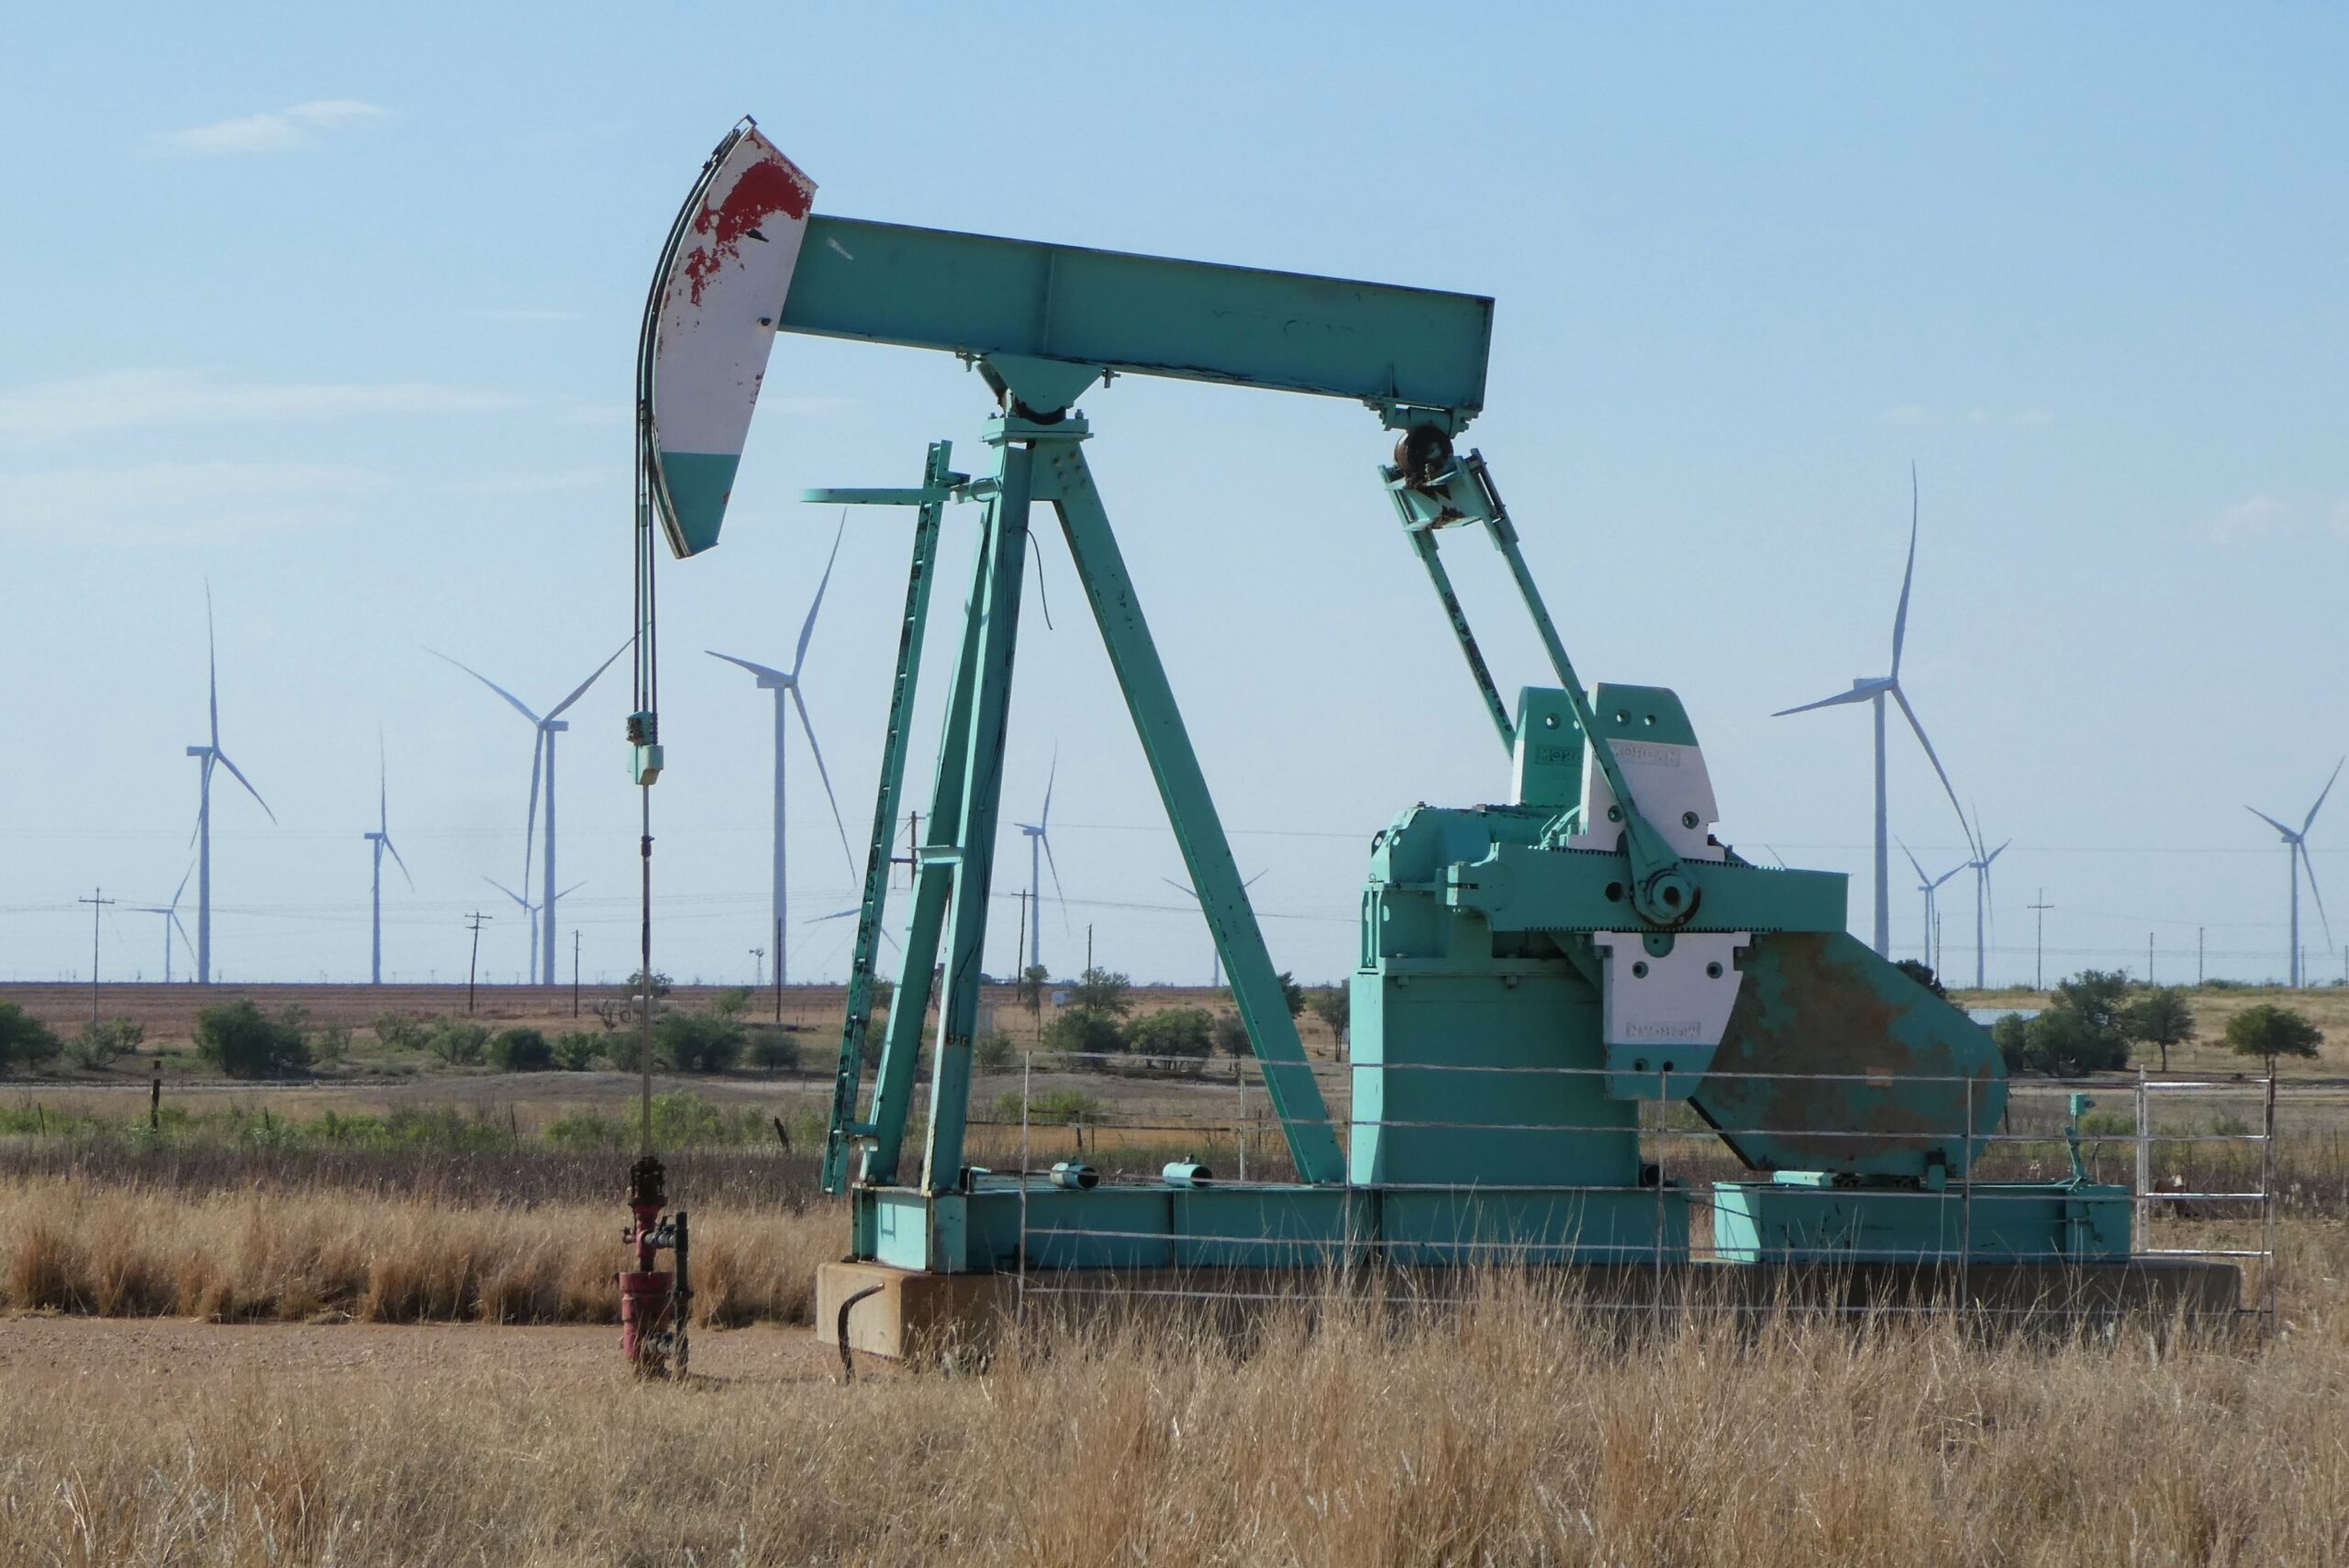 Oil pumpjack in the foreground with wind turbines in the background in a field in Texas.